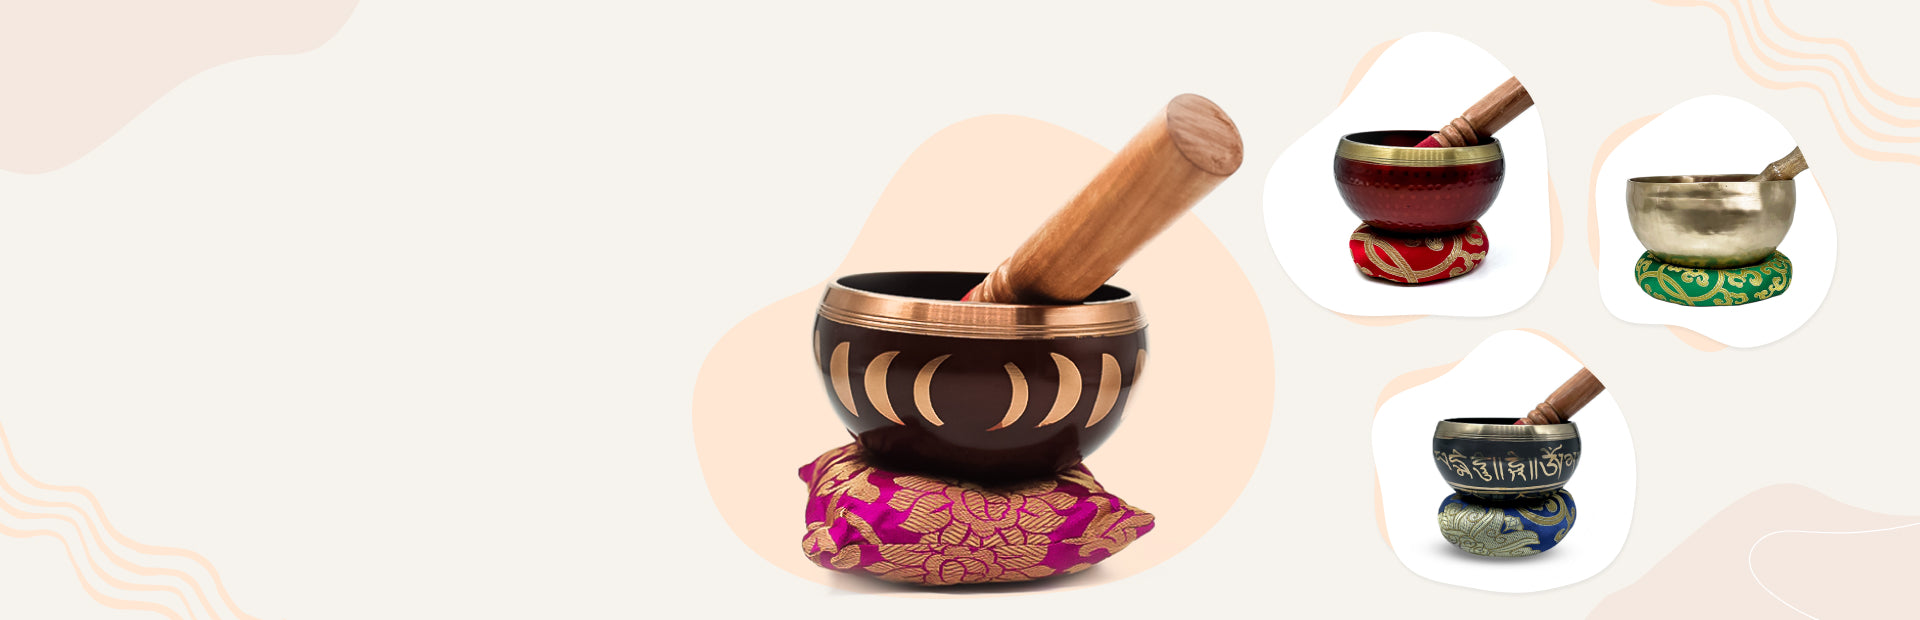 solacely singing bowls to remove negative energy